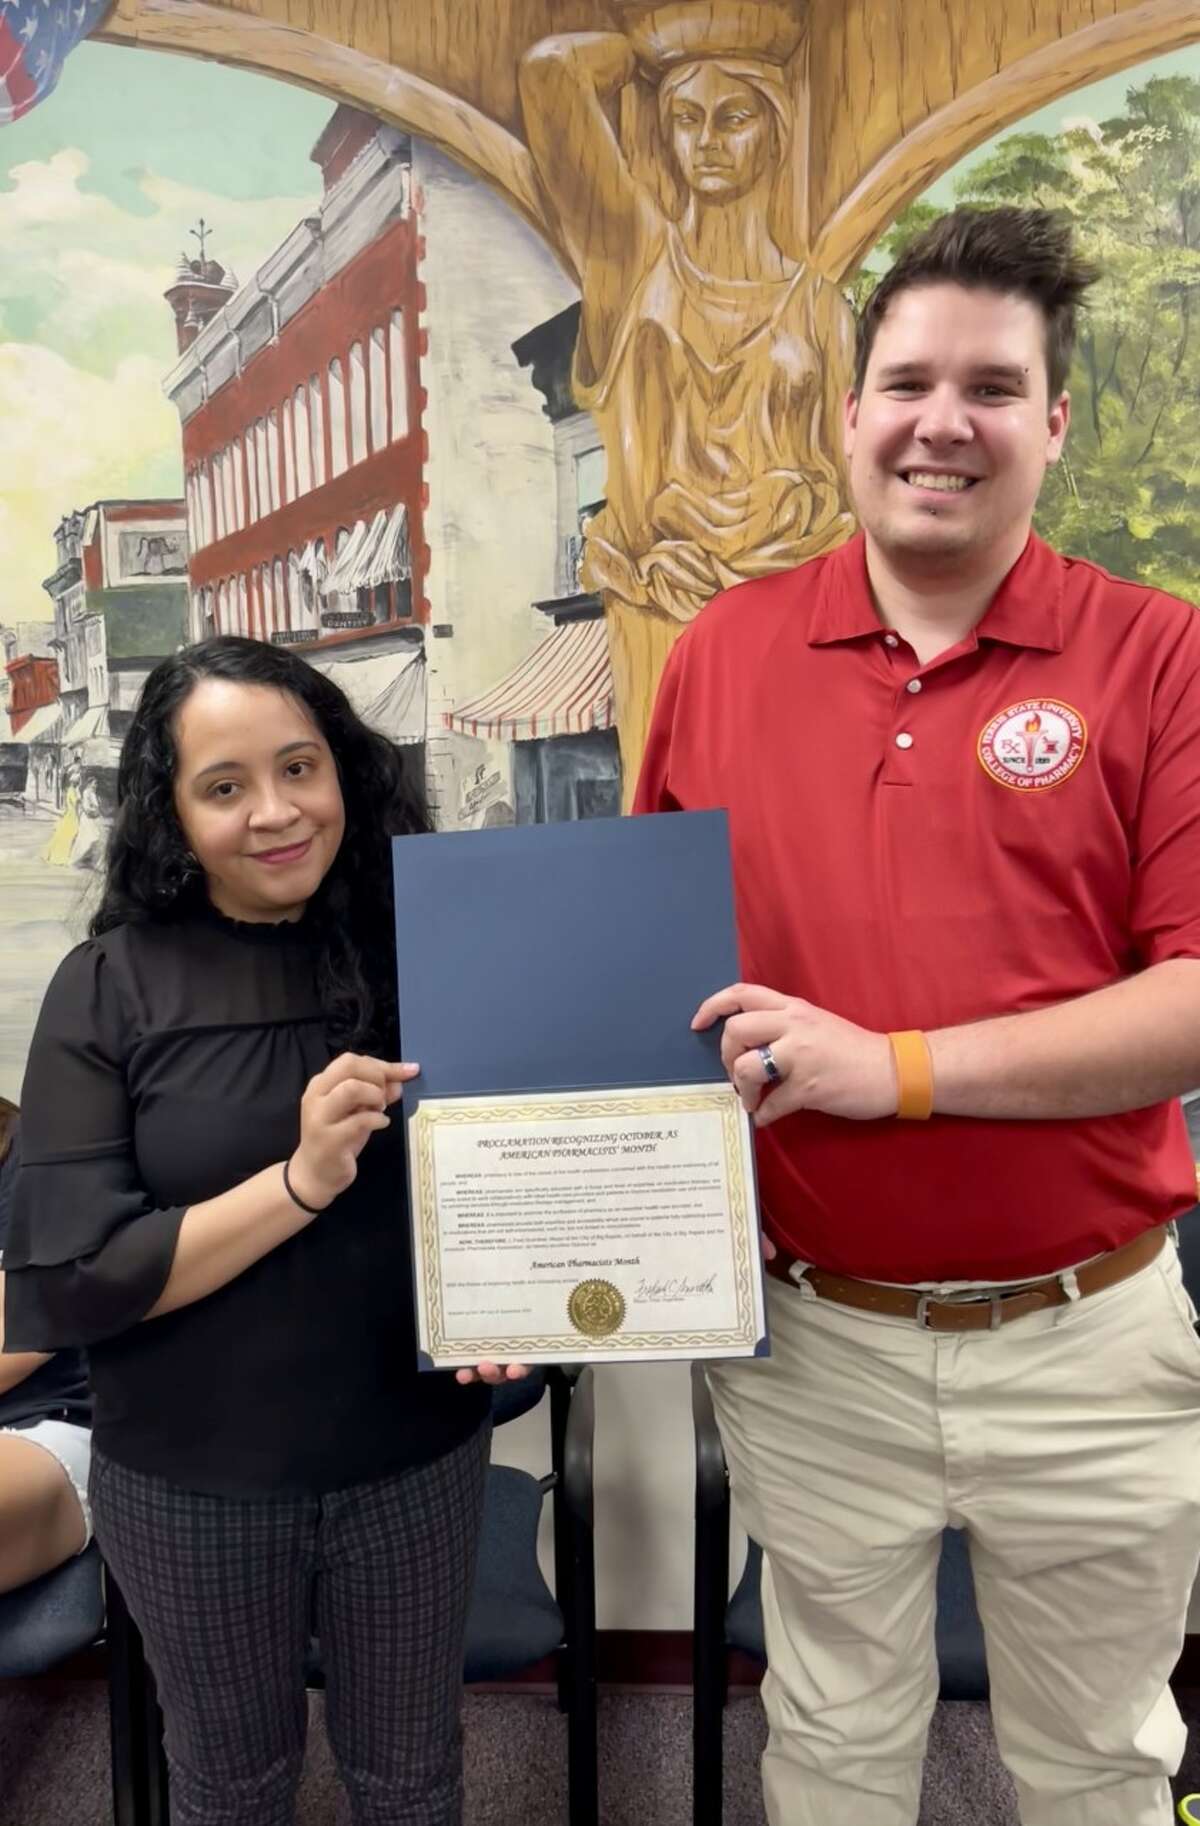 Ferris State University Pharmacy students Maria Gonzales (left) and Jordan Hiltunen (right) were presnted with a proclamation recognizing October as American Pharmacists' Month during a recent city commission meeting.